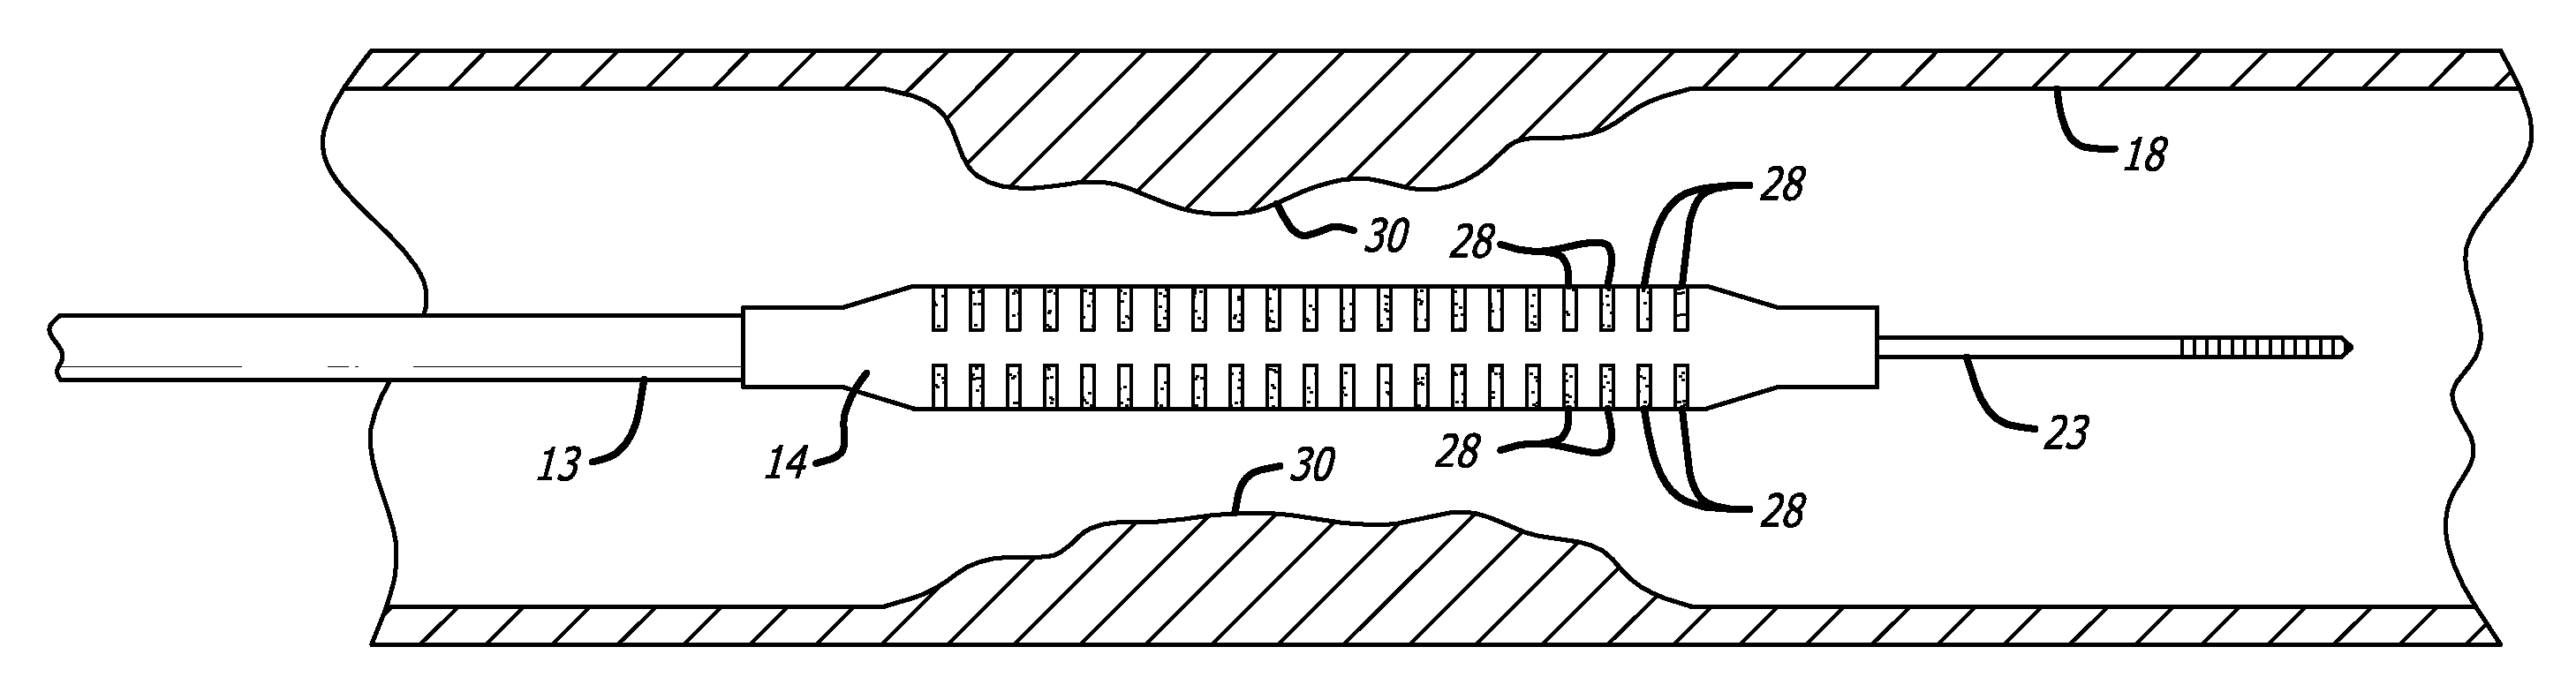 Delivery system with incremental markers